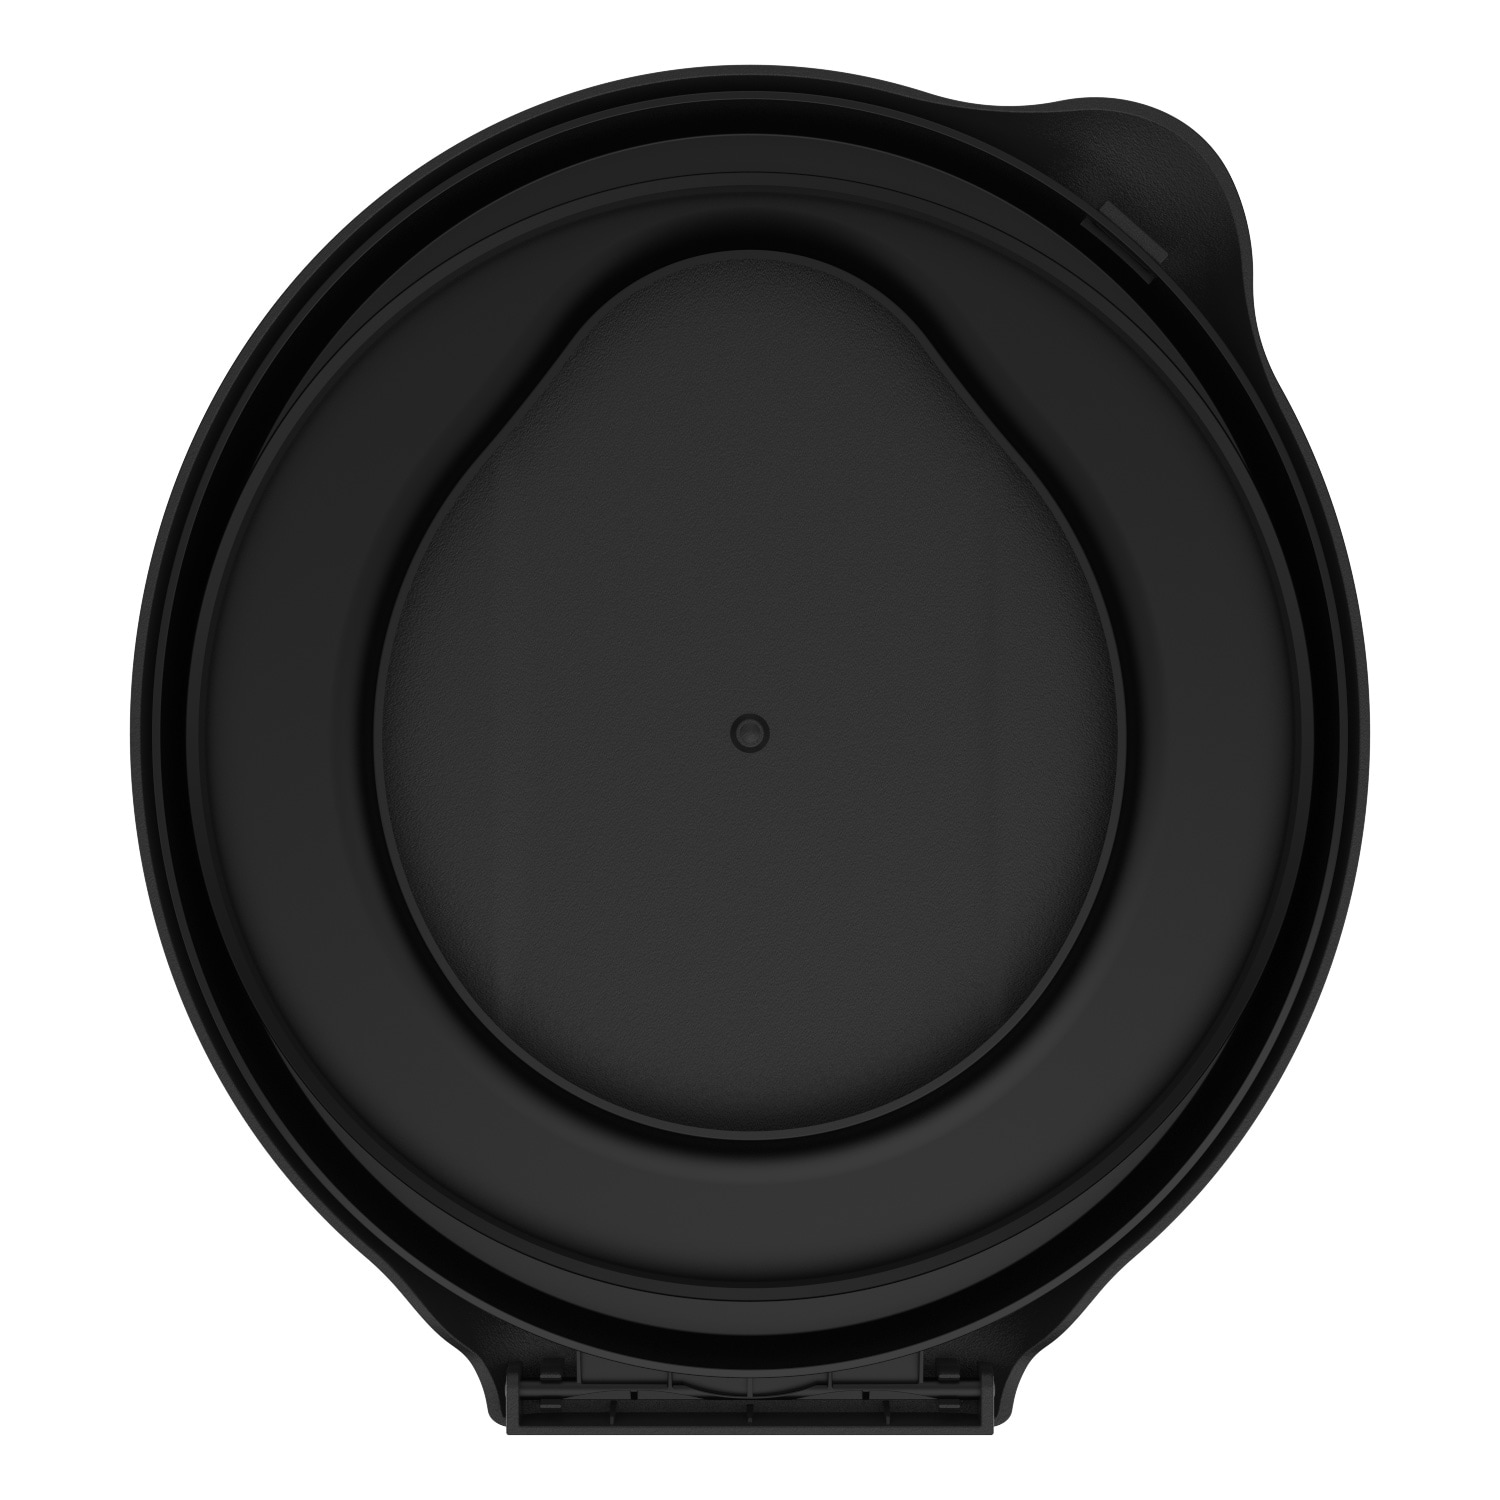 Dunny Seat Plastic Black Round Toilet Seat in the Toilet Seats department at